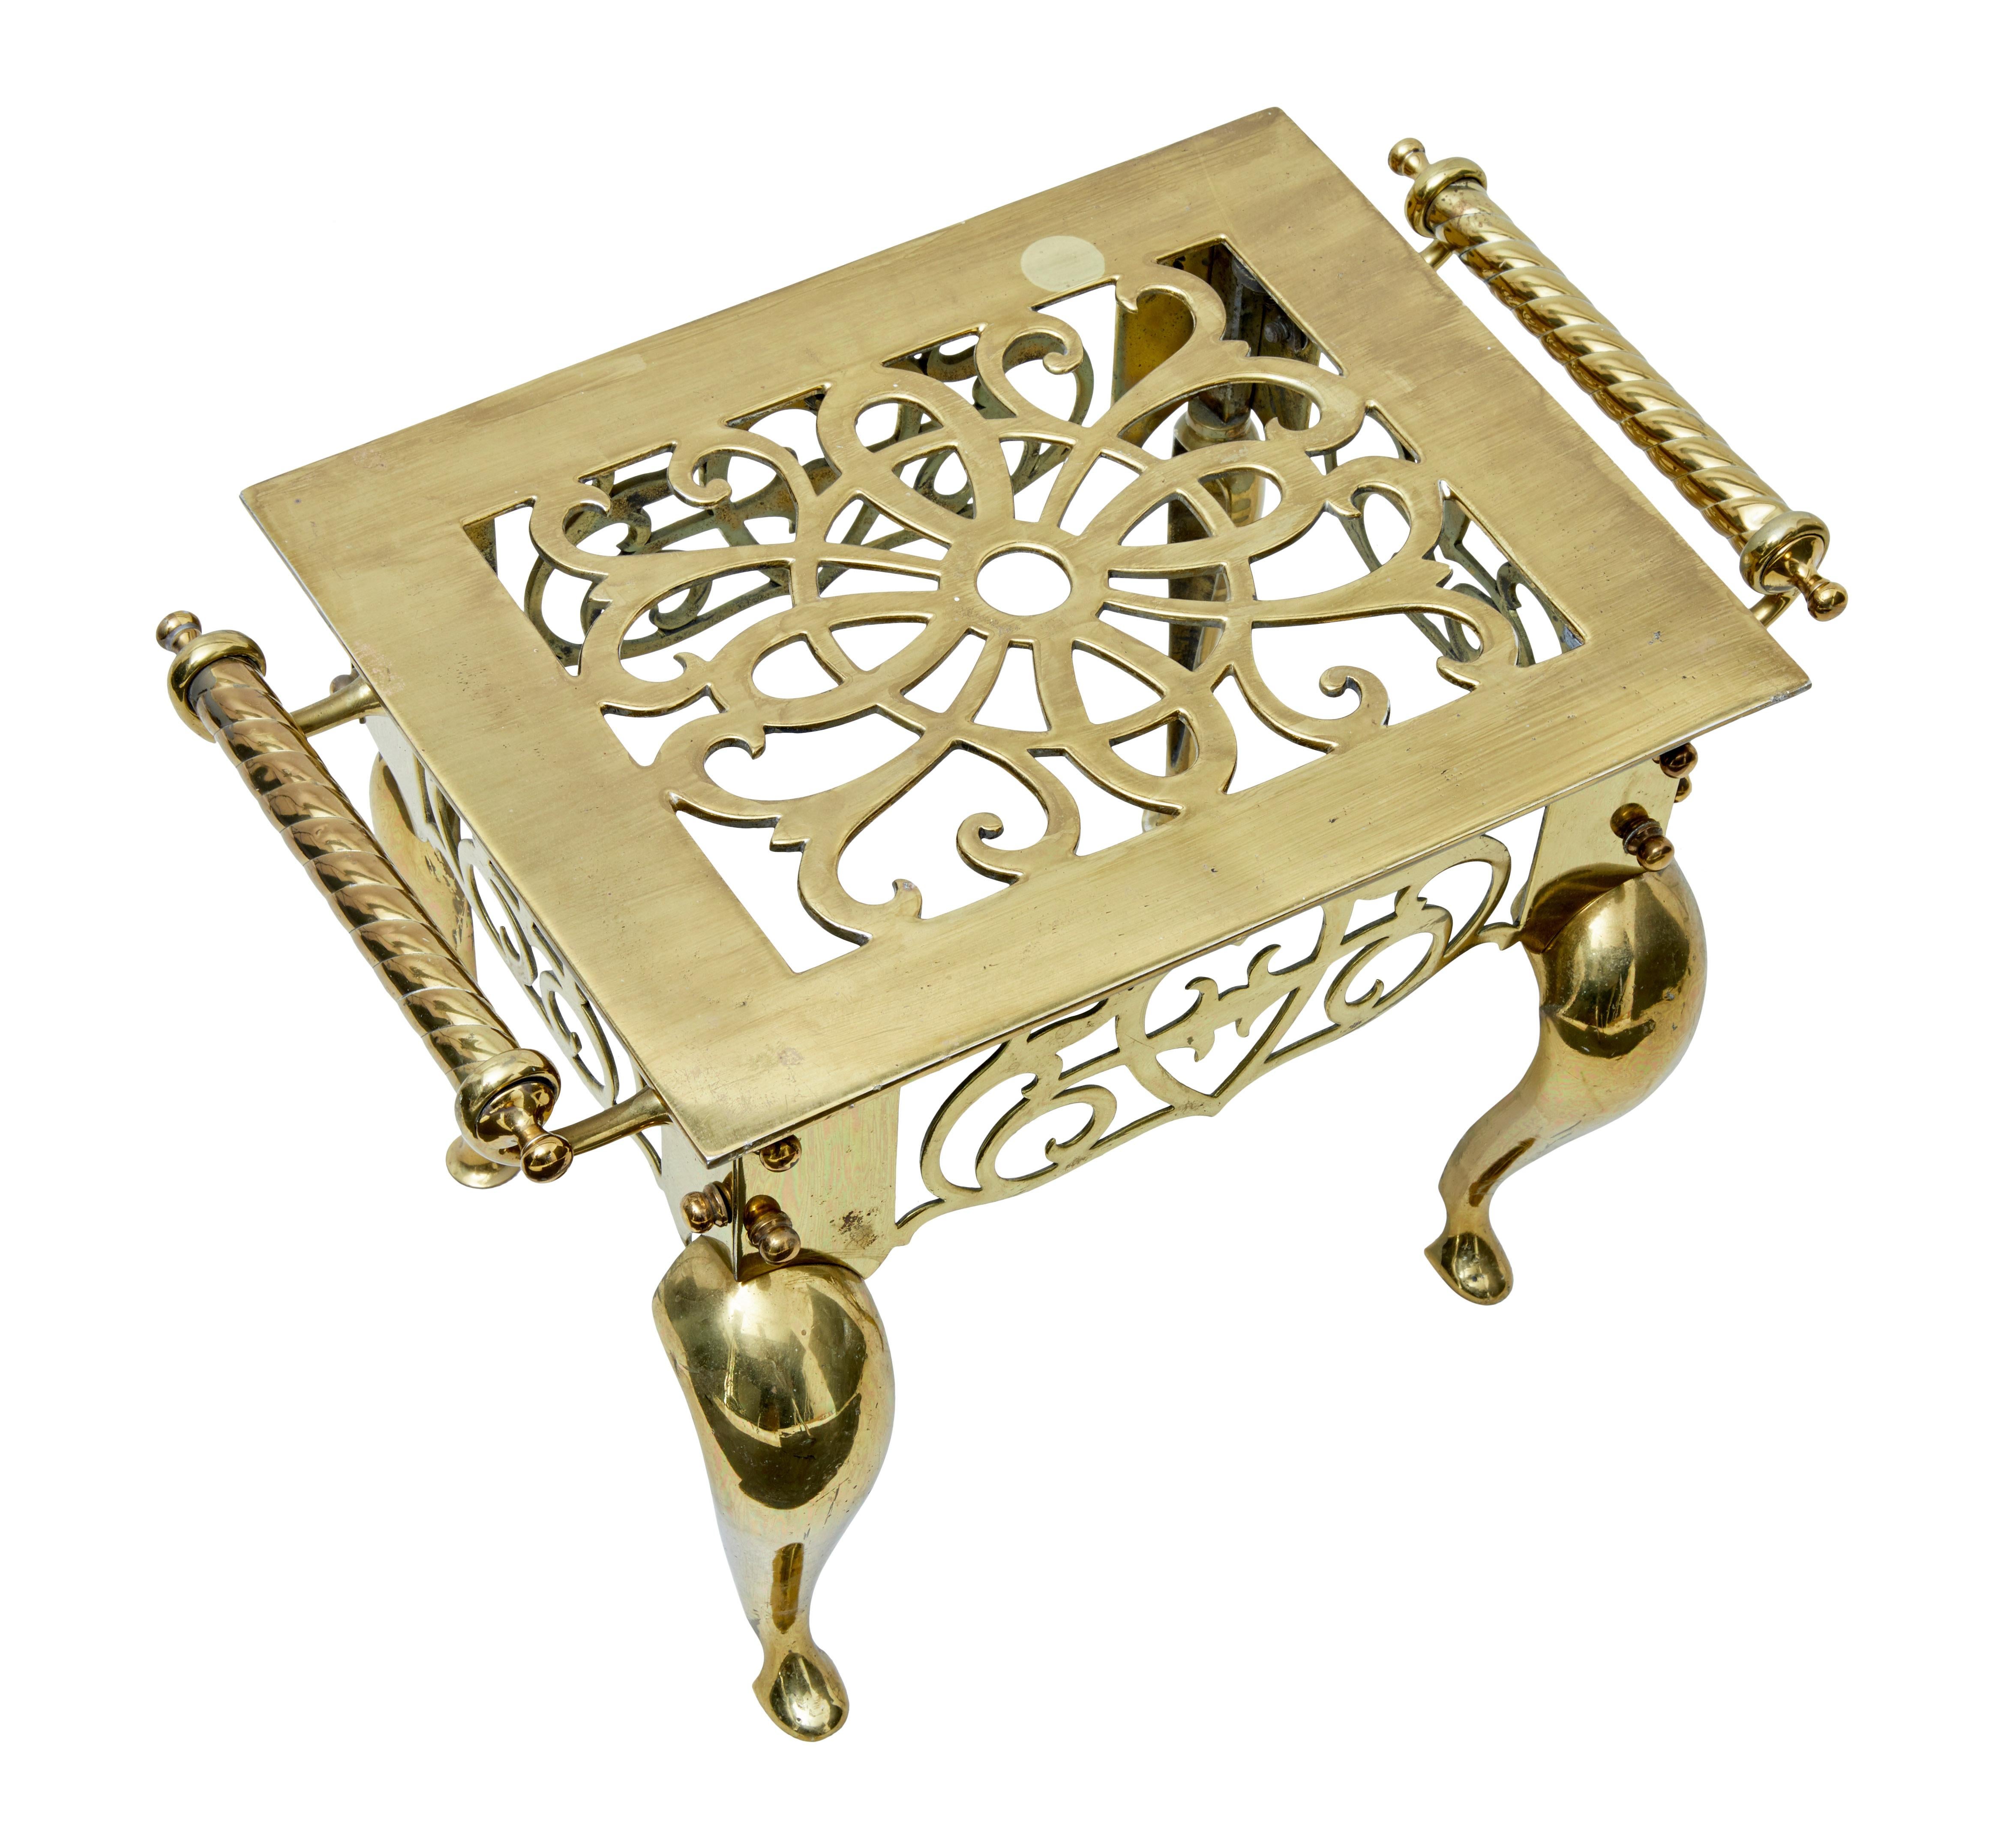 Good quality stamped Victorian brass trivet footman.

Pierced design to the top and sides, spun brass handles to the sides.

Stamped on the underside twice.